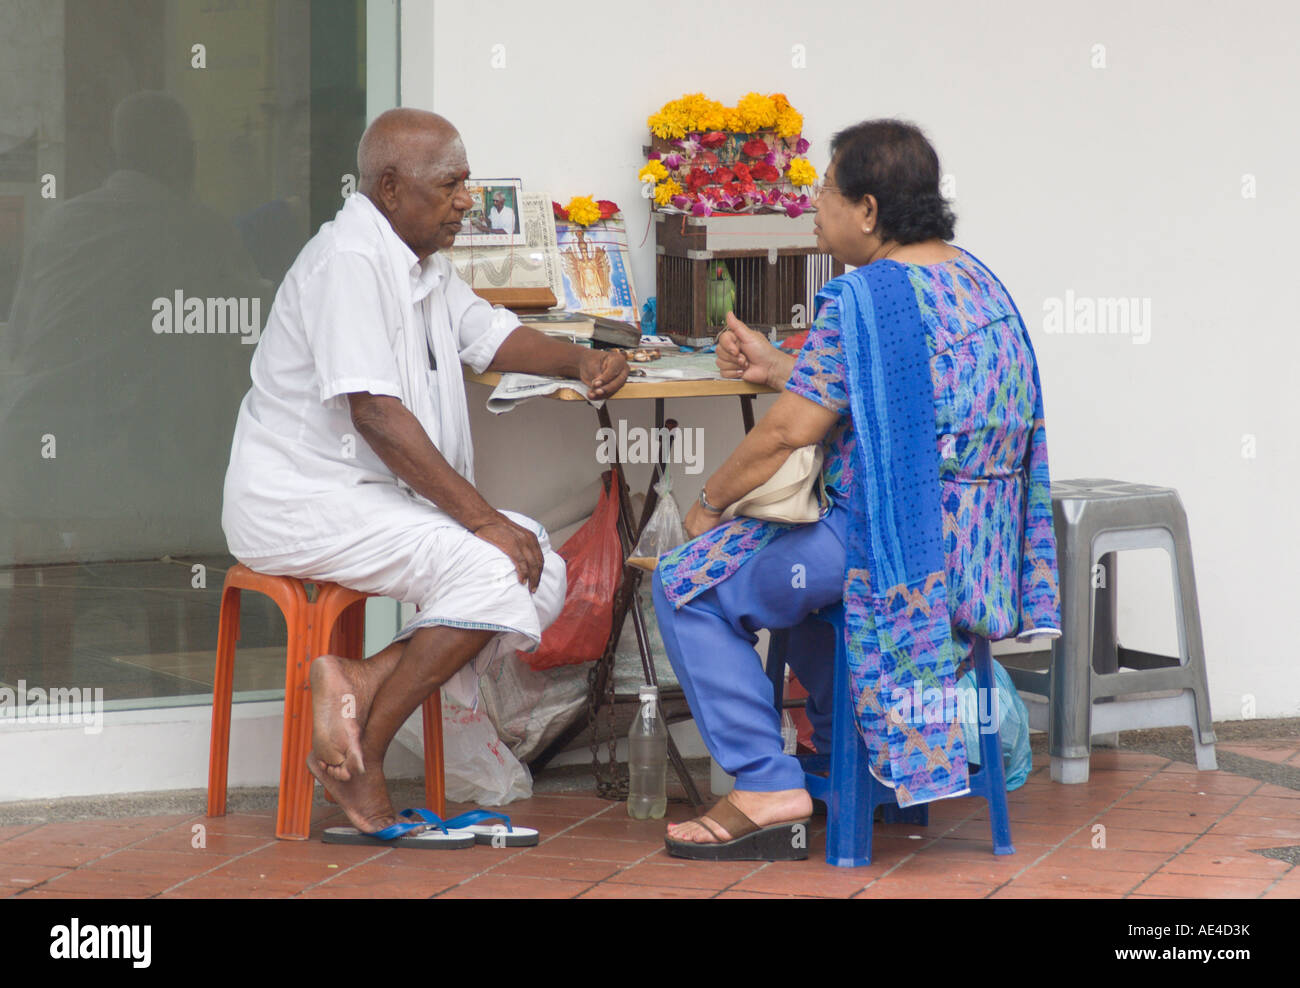 Fortune teller with a customer, Little India, Singapore, Southeast Asia, Asia Stock Photo